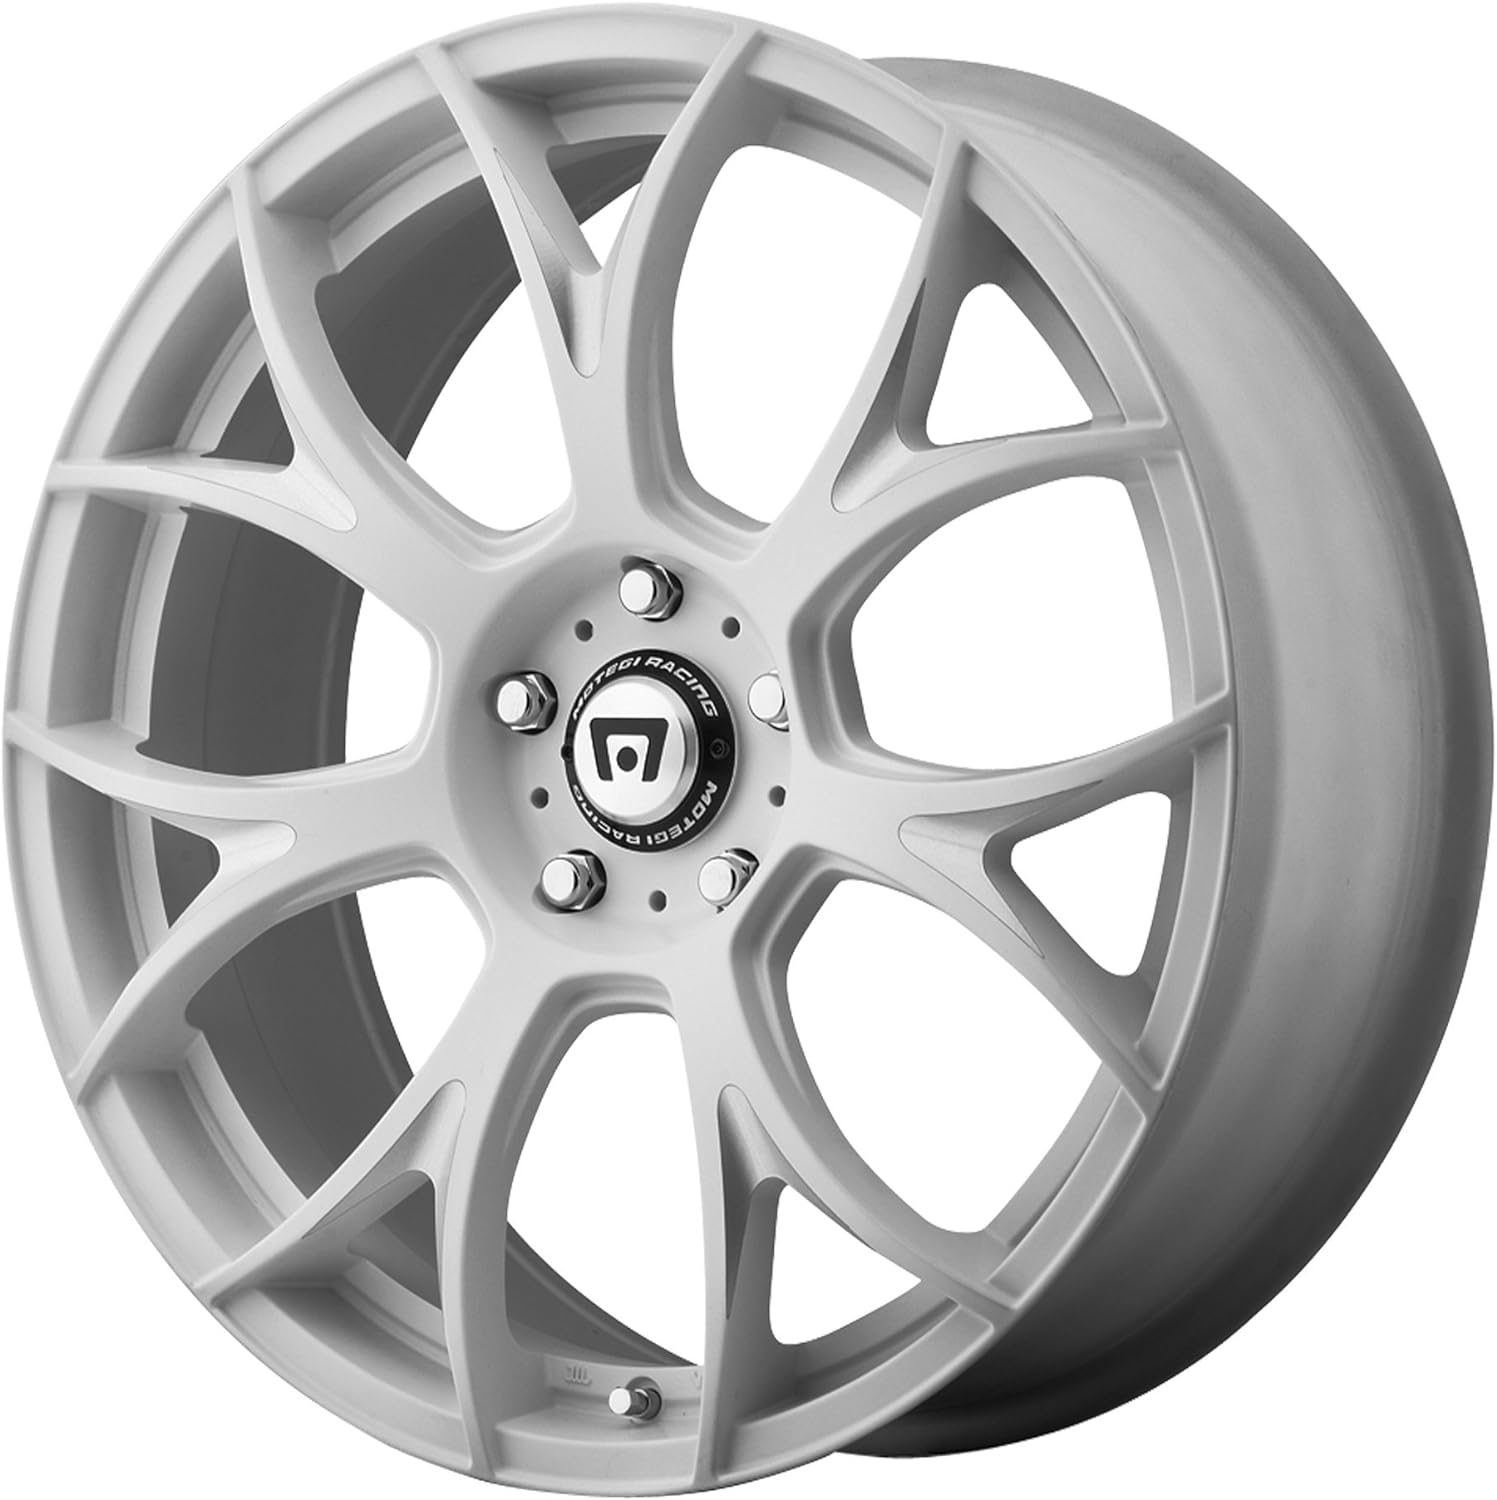 S650 Mustang 2024 Mustang Wheels Offsets & Fitment (same as S550)? -amazon.com%2Fimages%2FI%2F71xGU86sLeL._AC_SL1500_